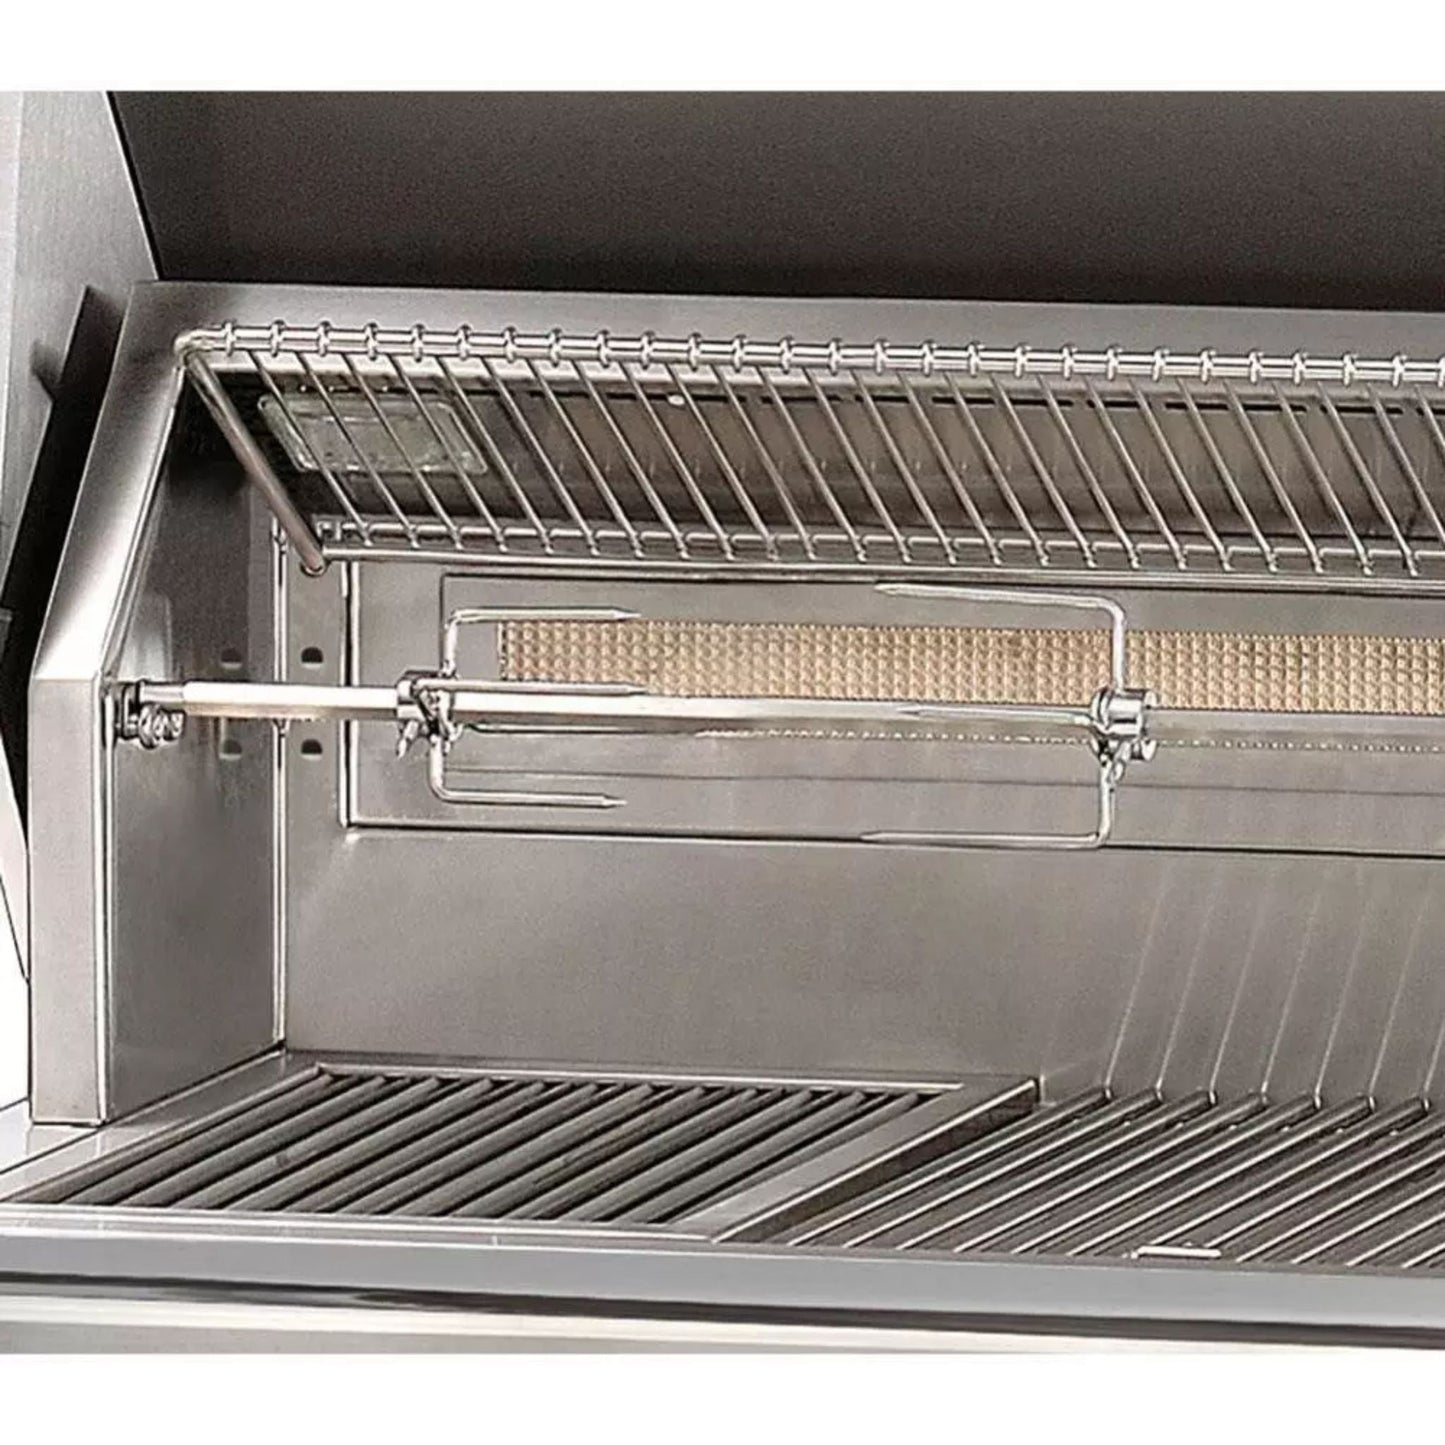 Alfresco Luxury All Grill 56" Stainless Steel Natural Gas Standard All Grill Head - 3 Burner + 1 Sear Burner